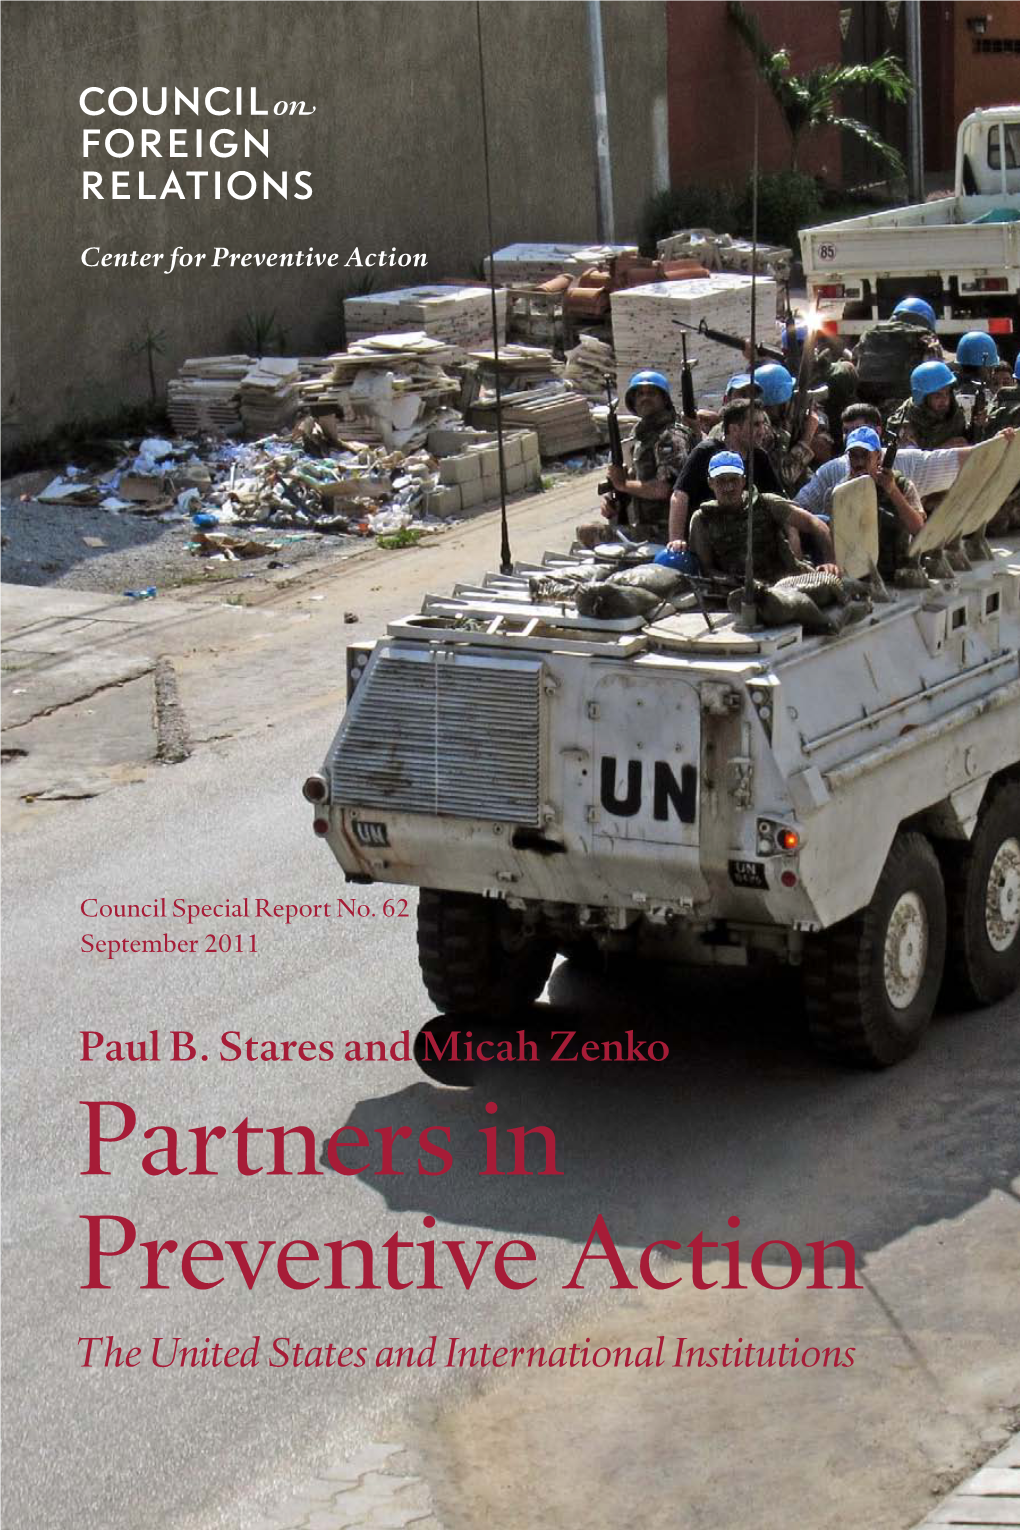 Partners in Preventive Action the United States and International Institutions